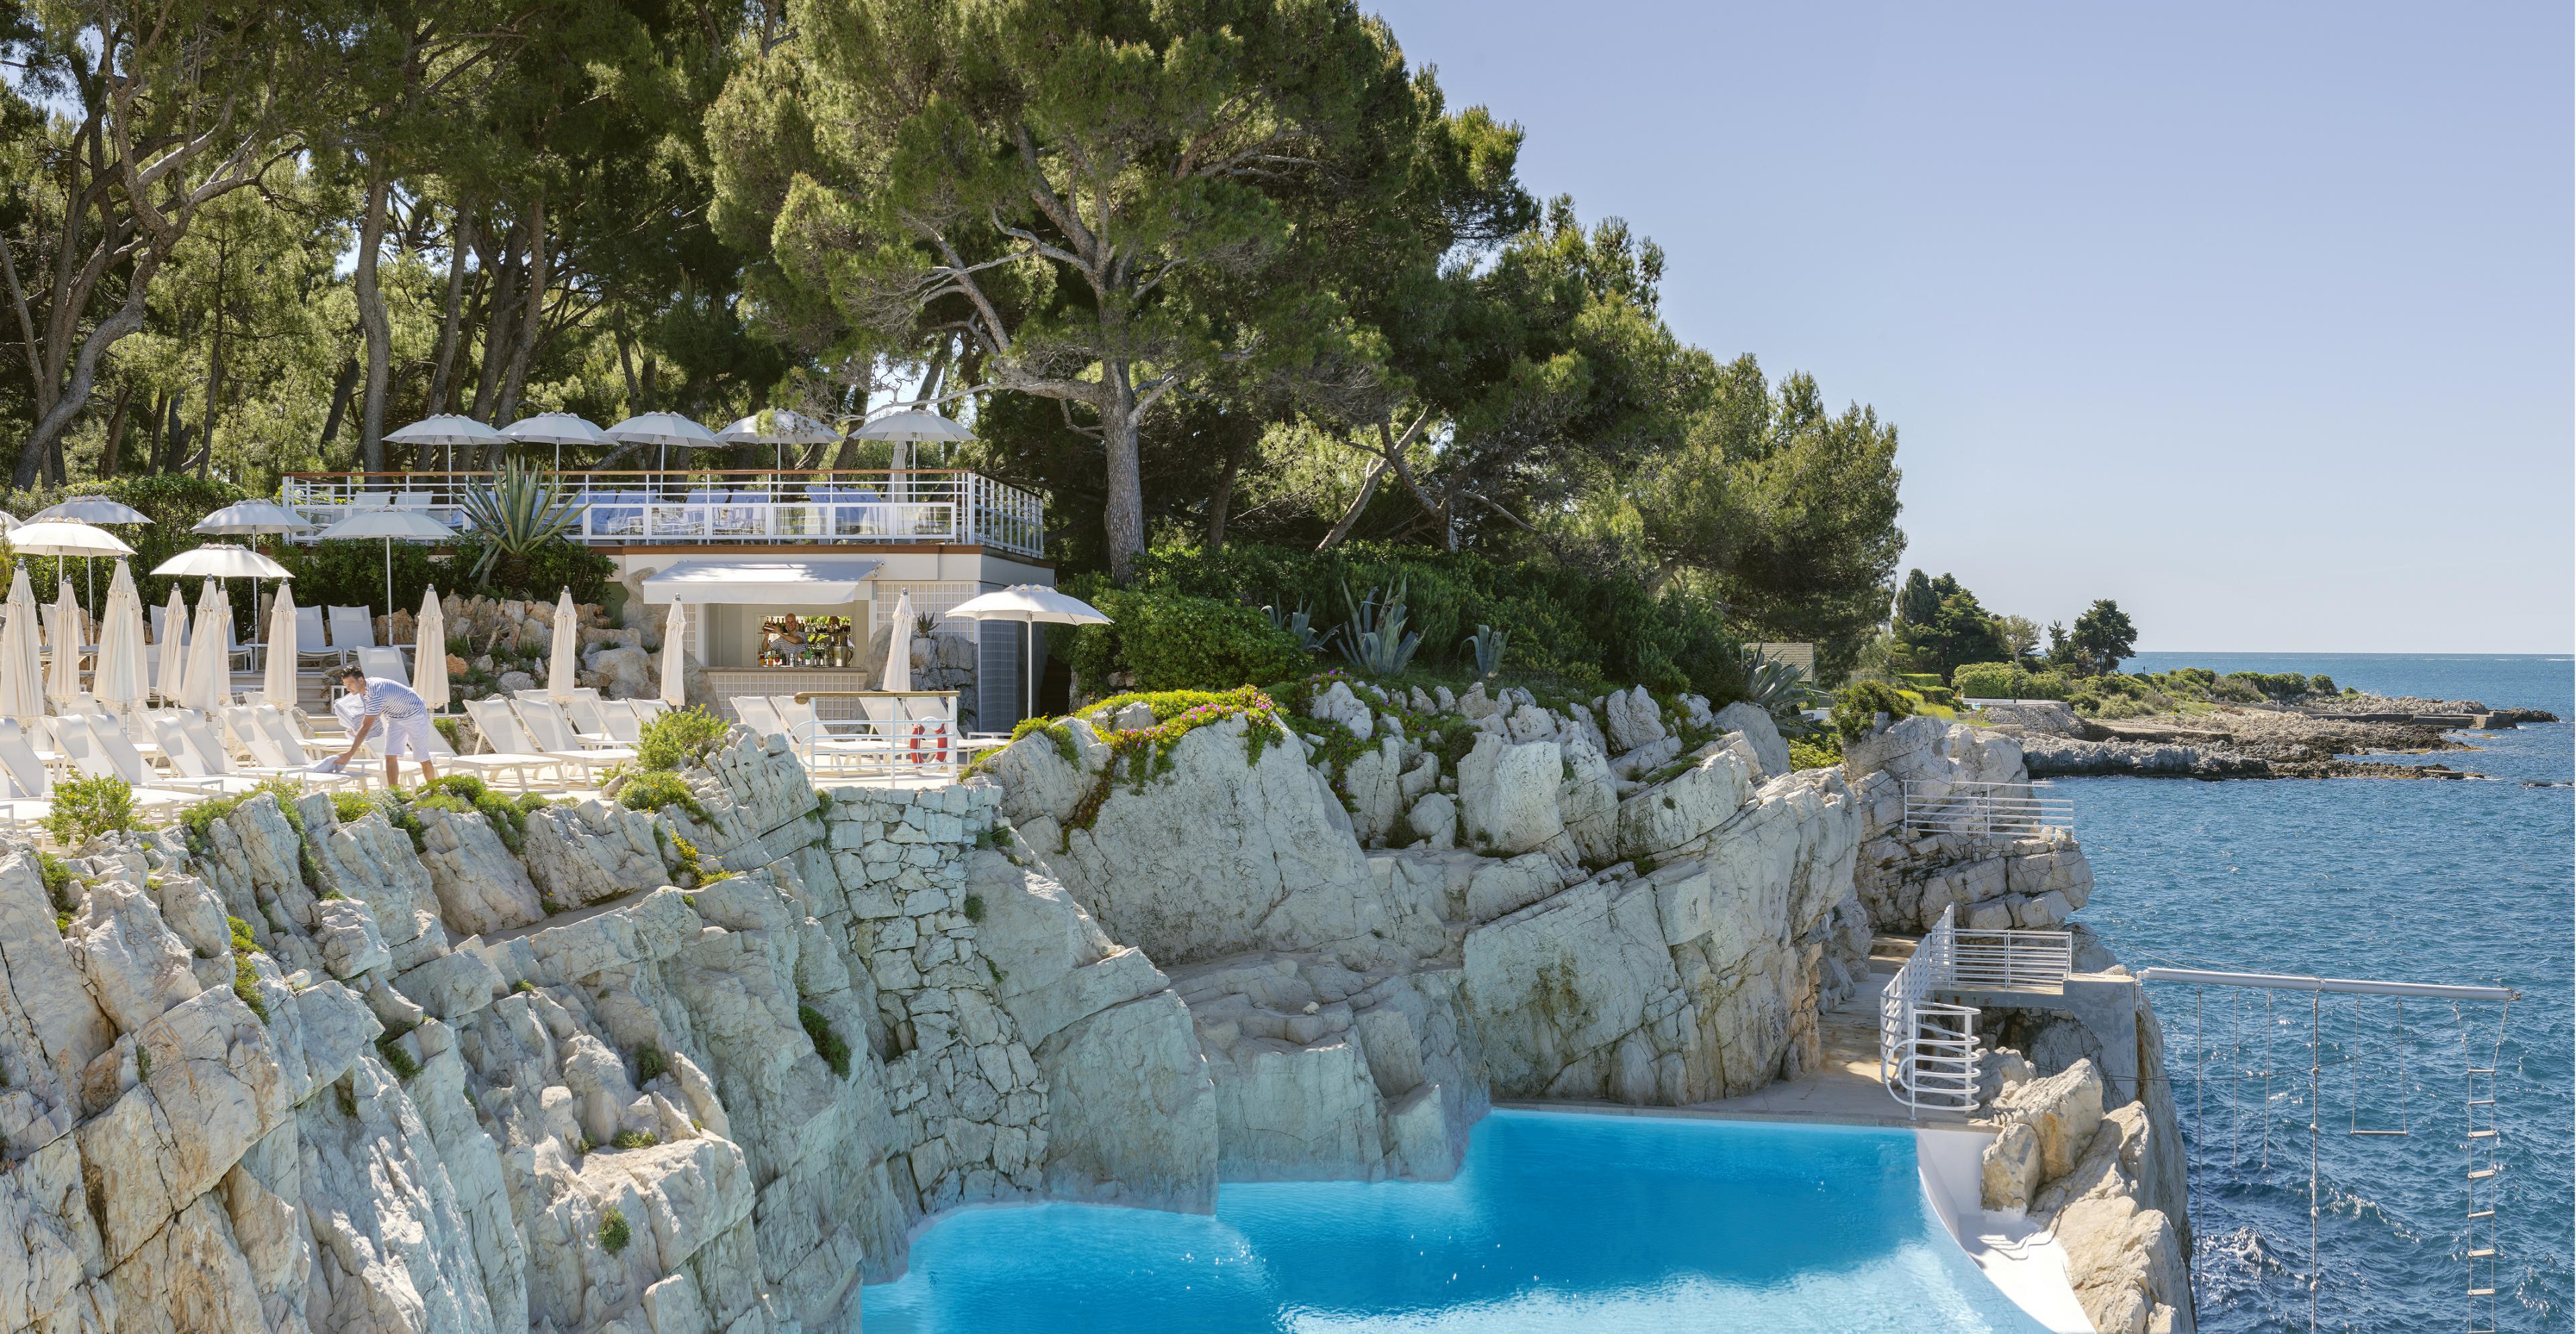 pool built into rocky cliff next to mediterranean with trees on left and sea on right